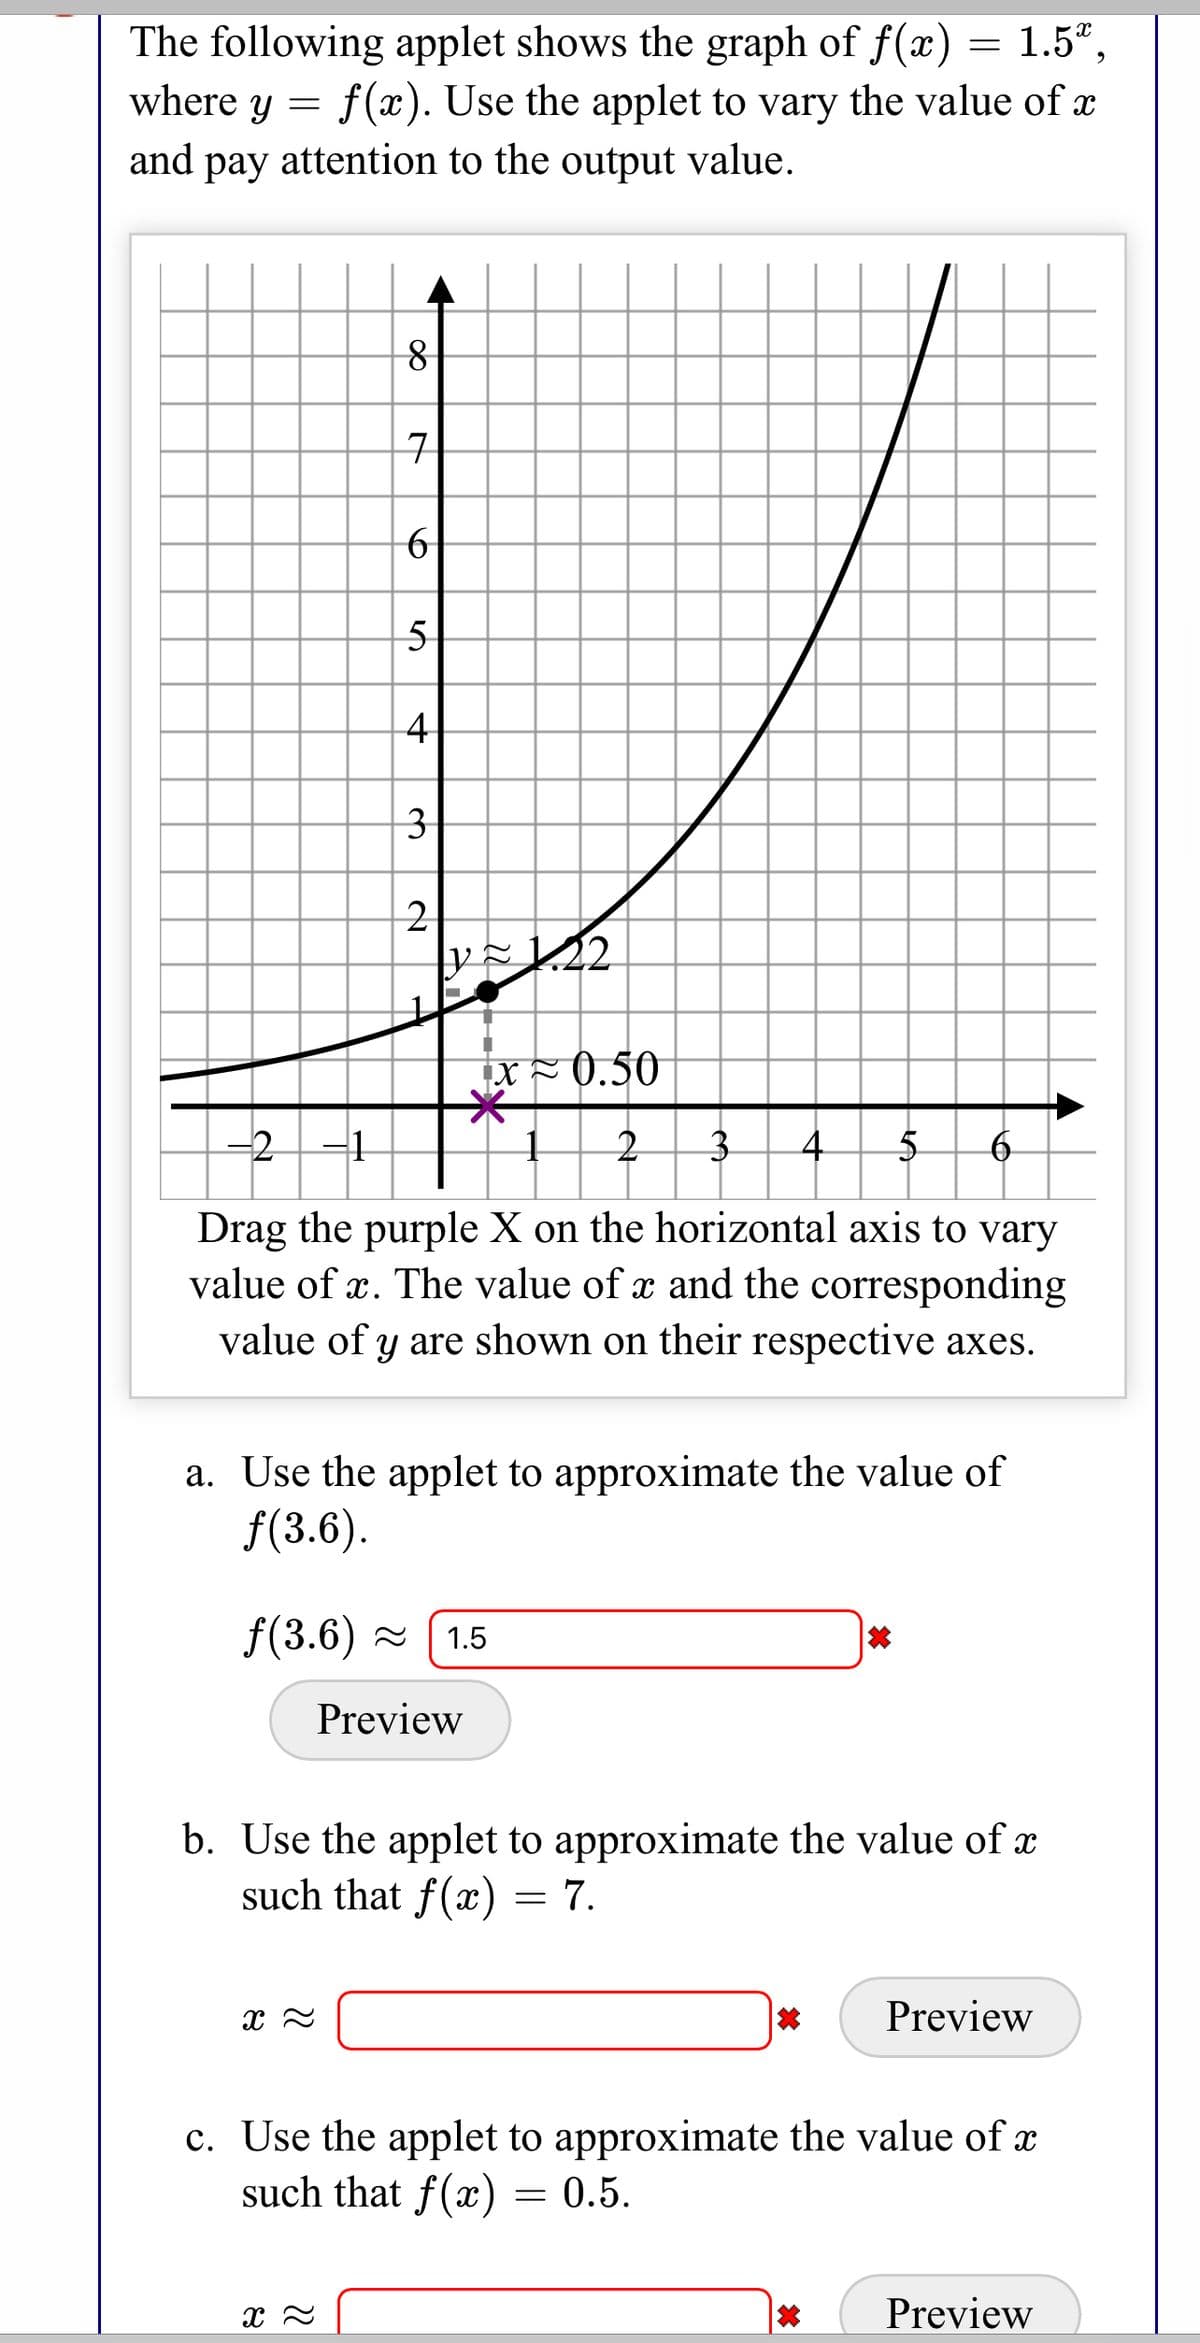 1.5°,
The following applet shows the graph of f(x)
where y = f(æ). Use the applet to vary the value of x
and pay attention to the output value.
рay
구
5
4
3
2
x×0.50
-2-1
4
Drag the purple X on the horizontal axis to vary
value of x. The value of x and the corresponding
value of y are shown on their respective axes.
a. Use the applet to approximate the value of
f(3.6).
f(3.6) = (1.5
Preview
b. Use the applet to approximate the value of x
such that f(x) = 7.
Preview
c. Use the applet to approximate the value of x
such that f(x) = 0.5.
Preview
